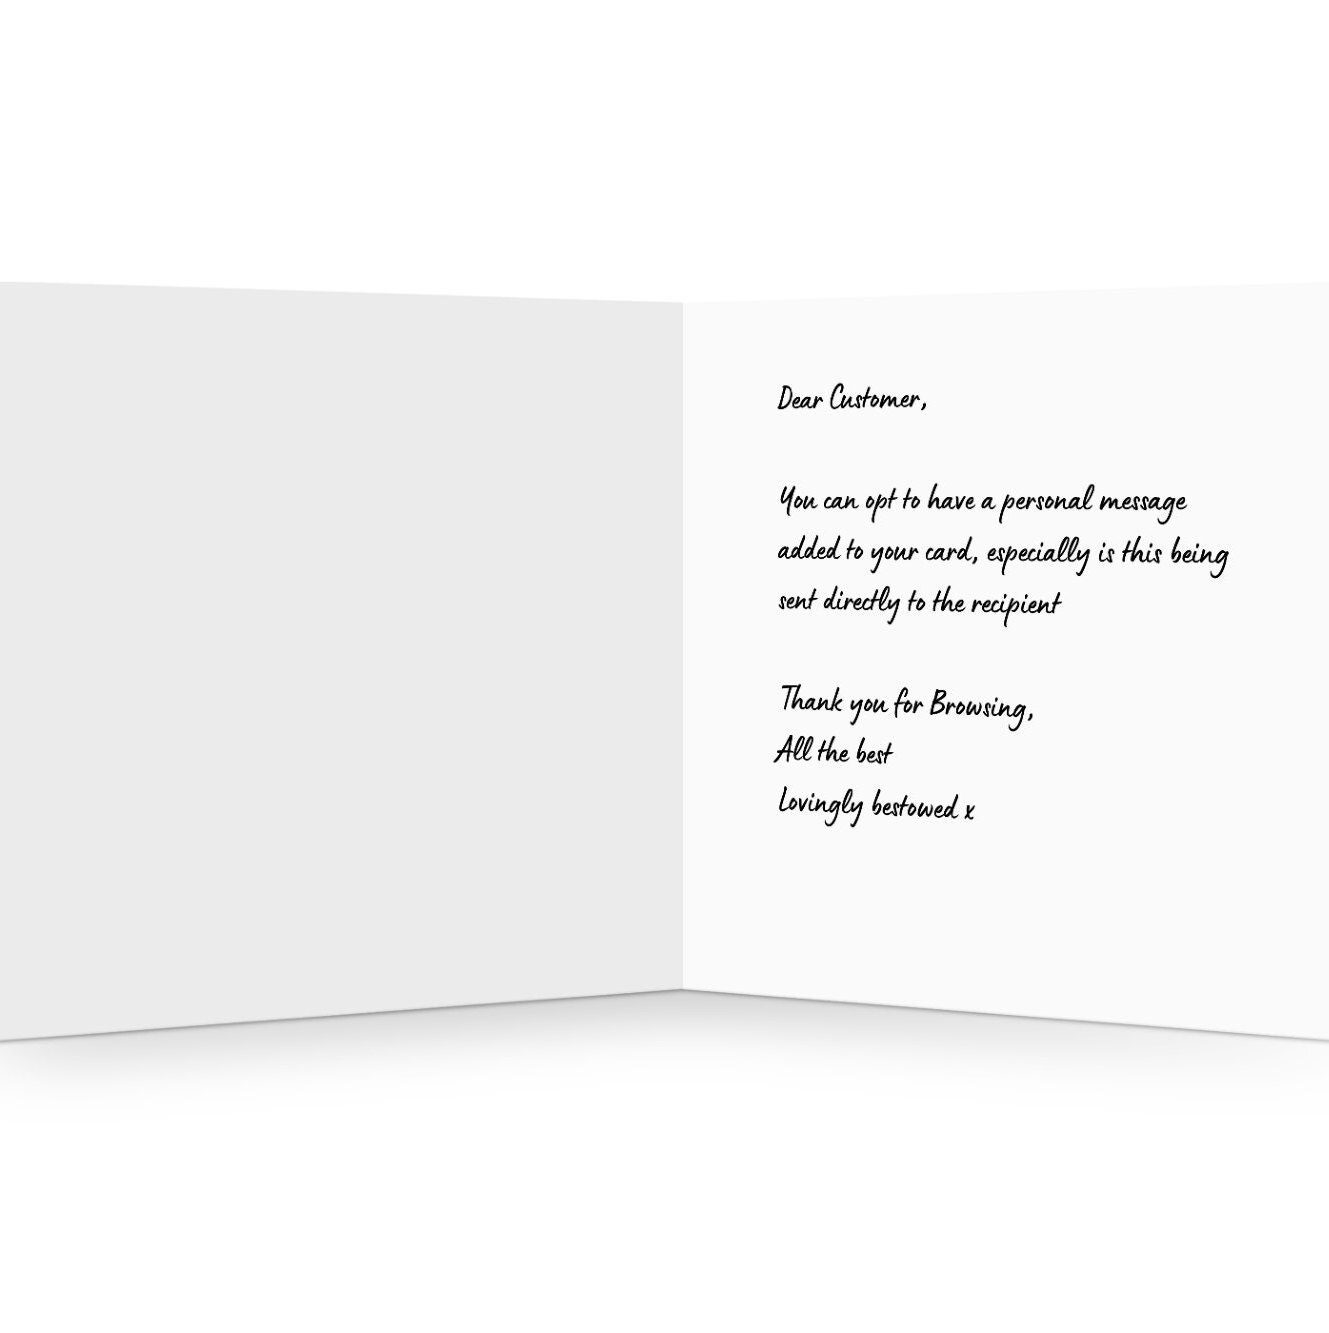 Baby Dedication Card for Him